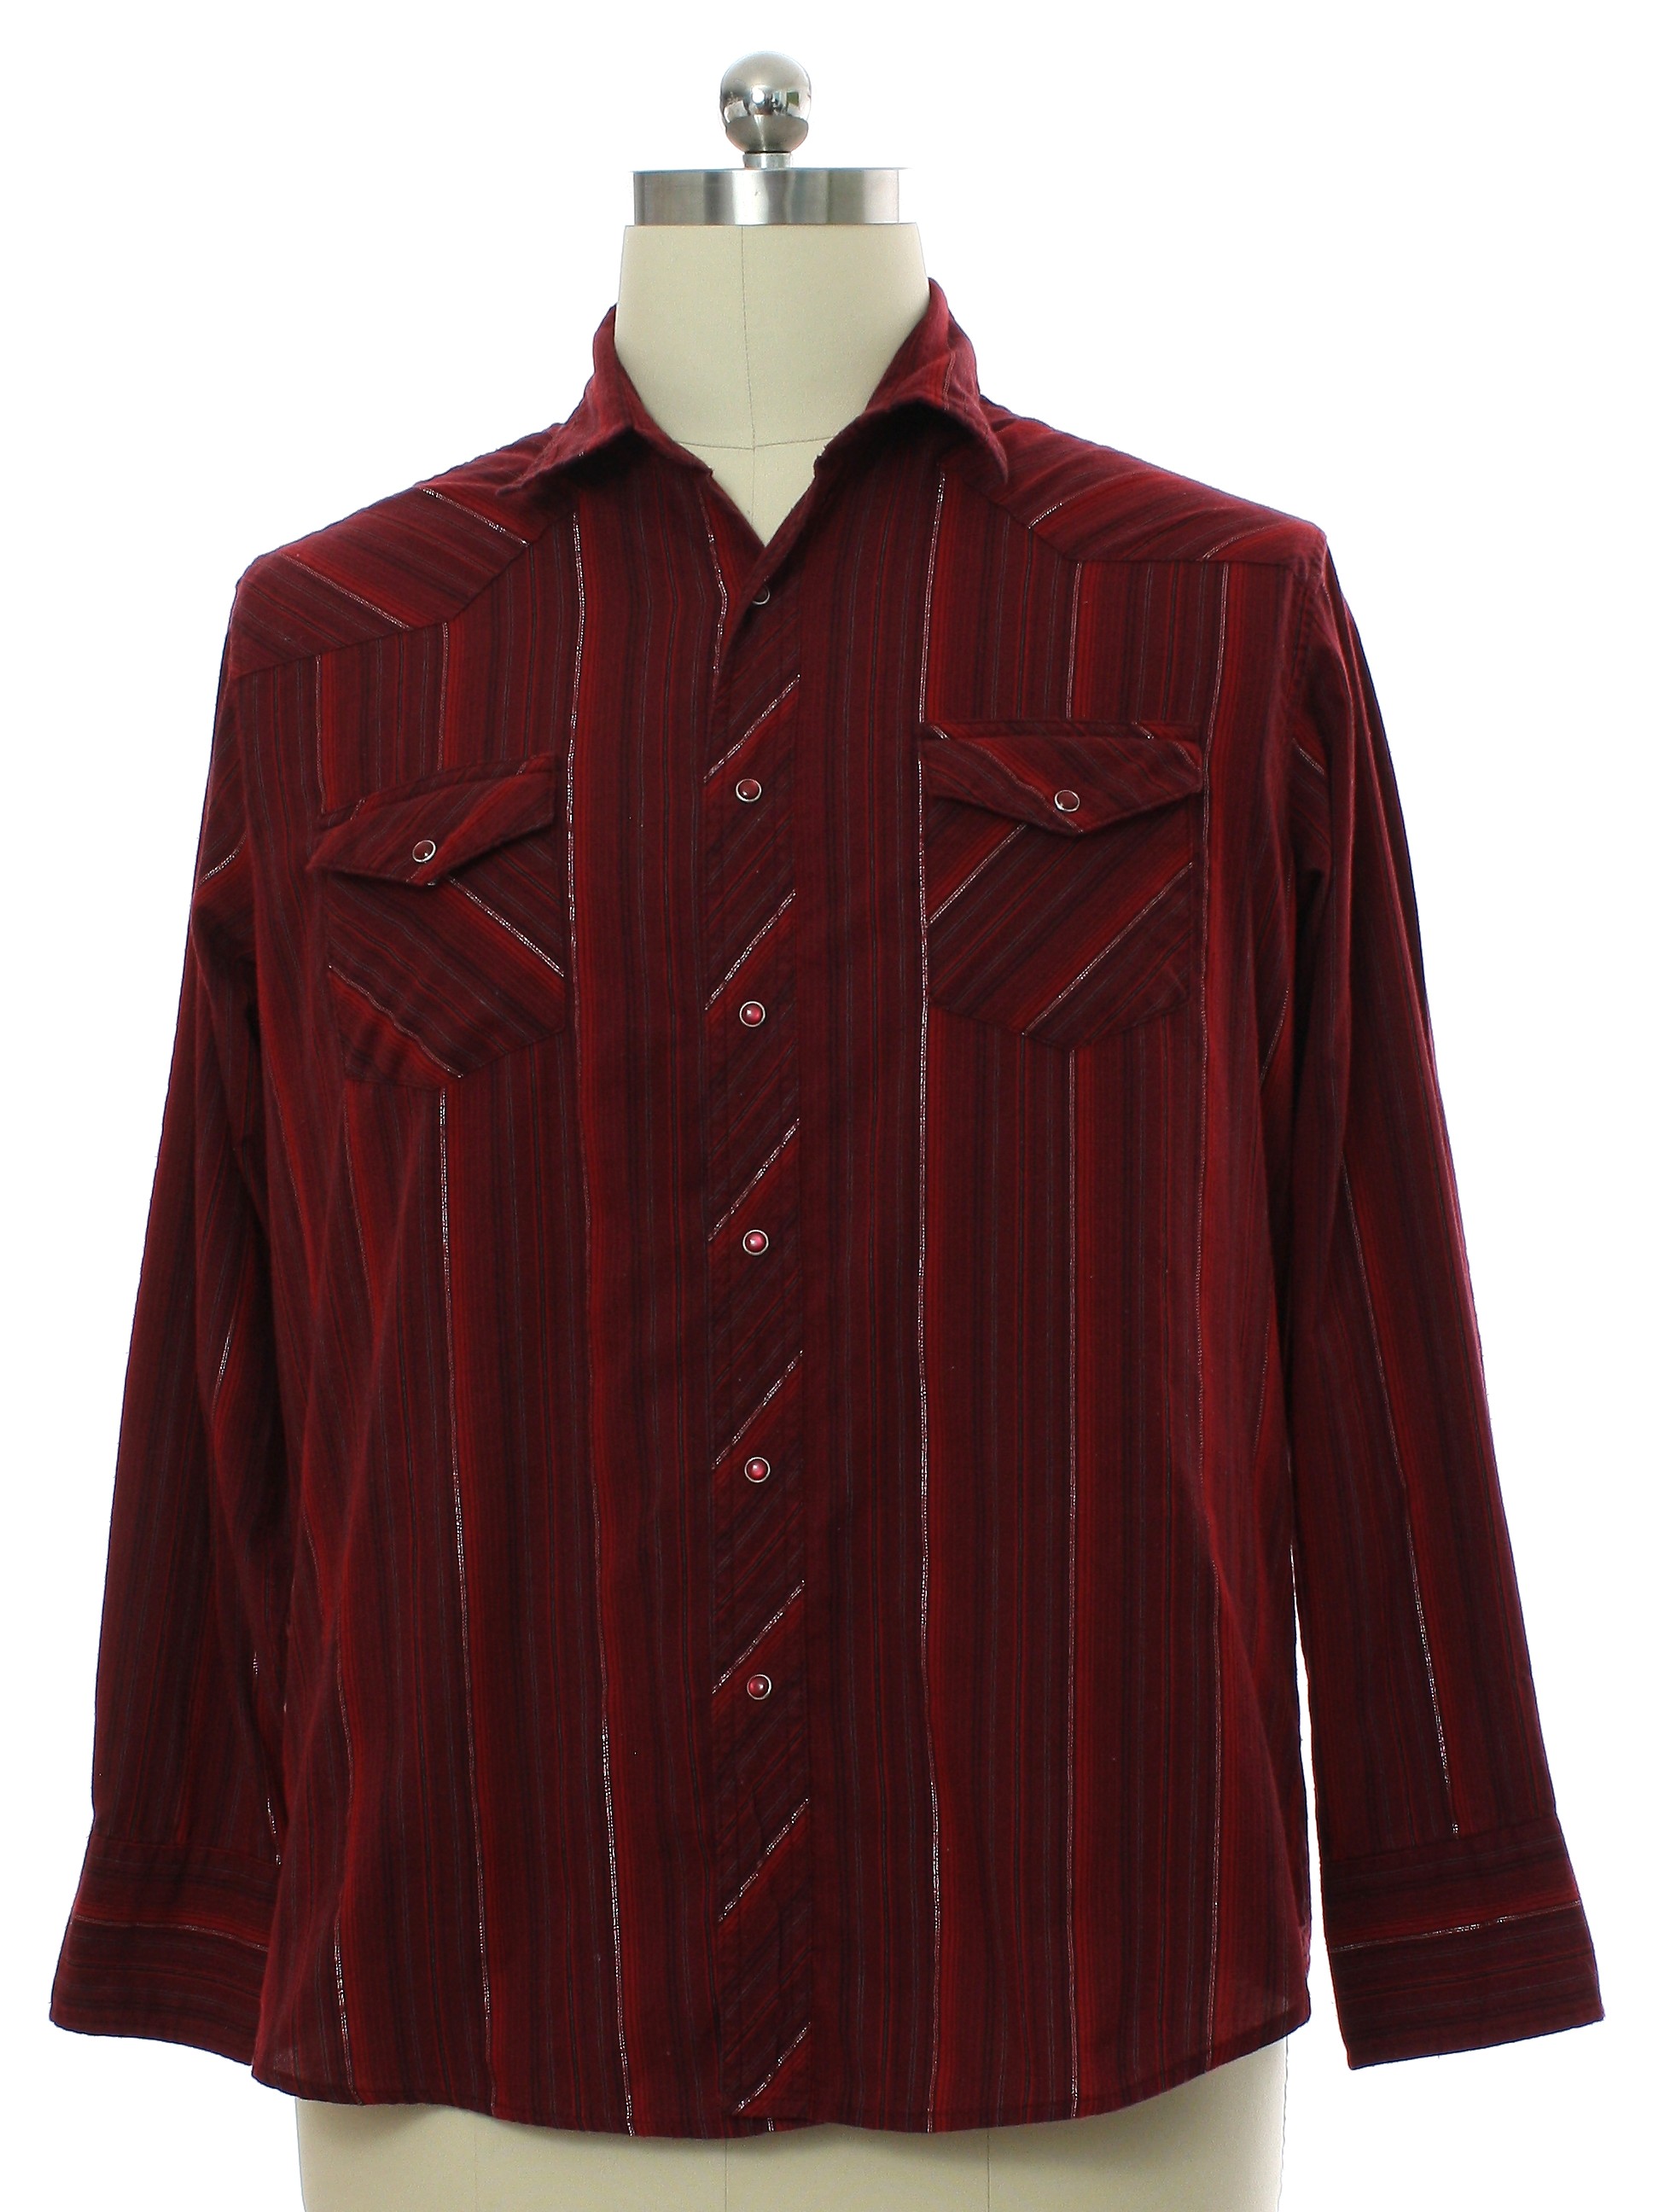 Western Shirt: 90s -Wrangler- Mens shades of red and burgundy, black ...